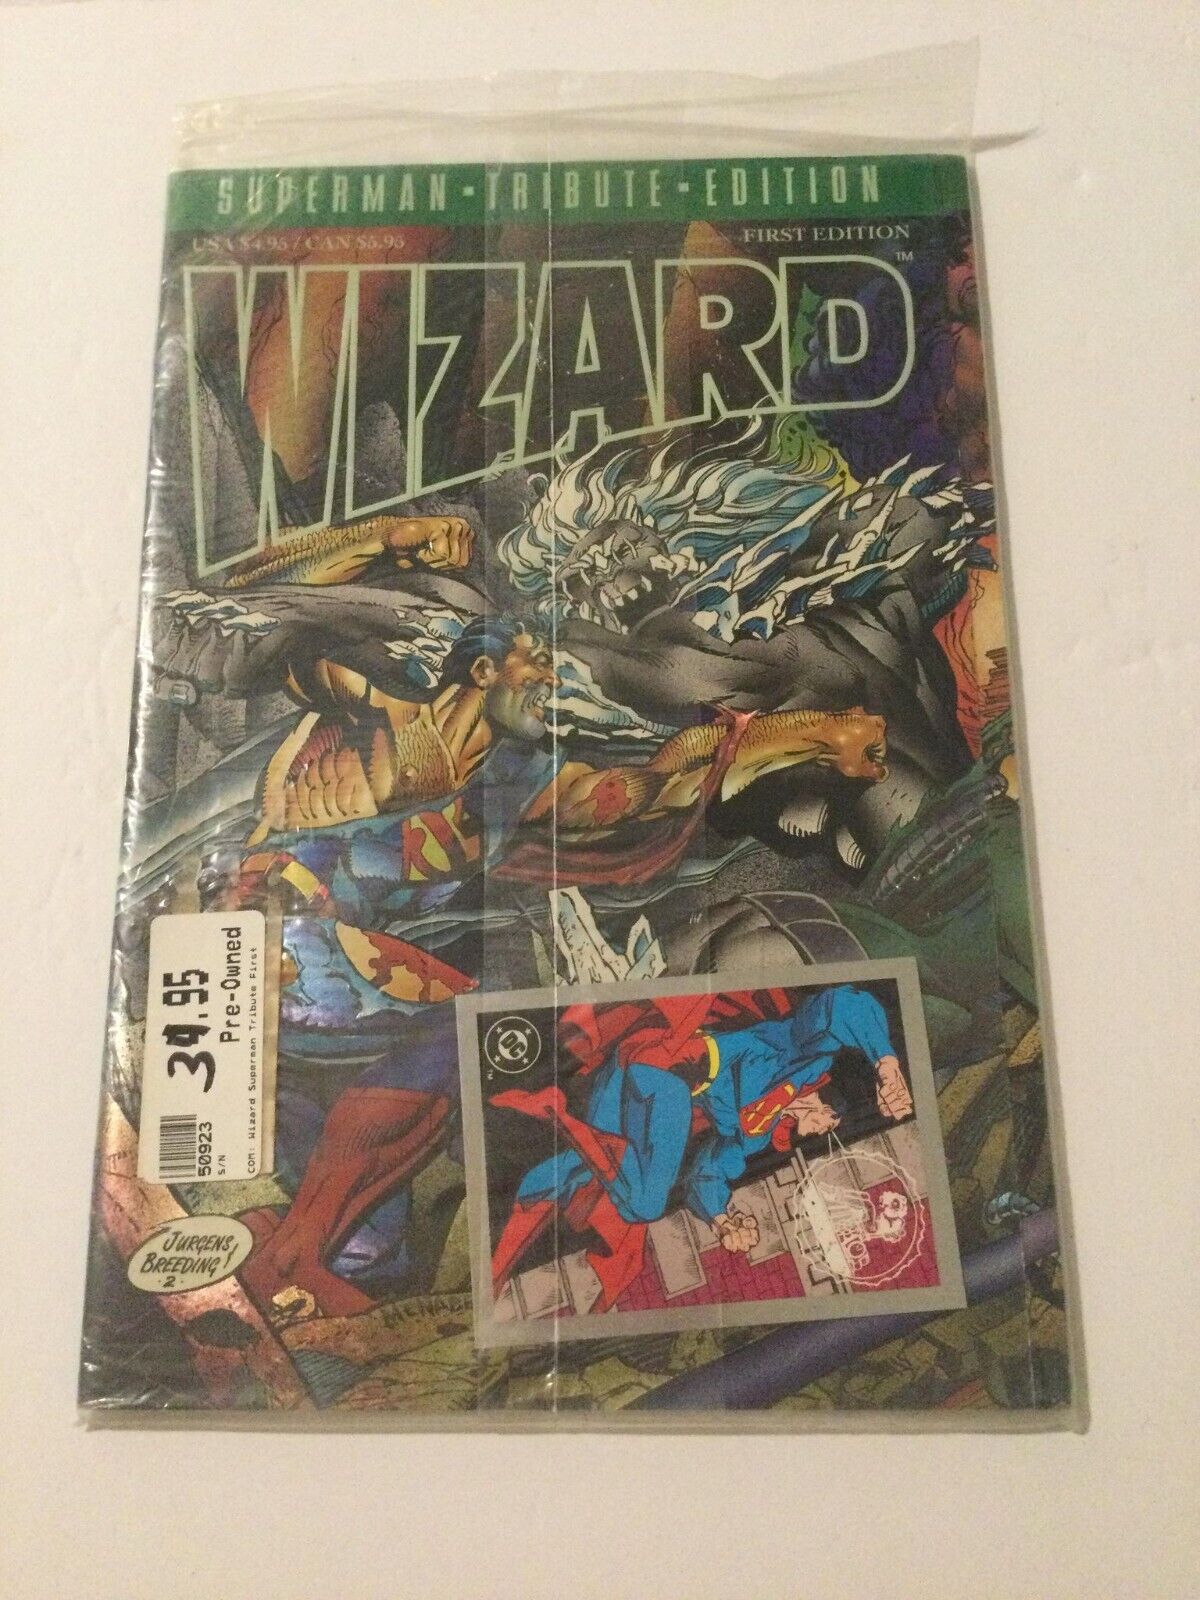 Wizard Superman-Tribute-Edition First Edition Sealed With Trading Card.